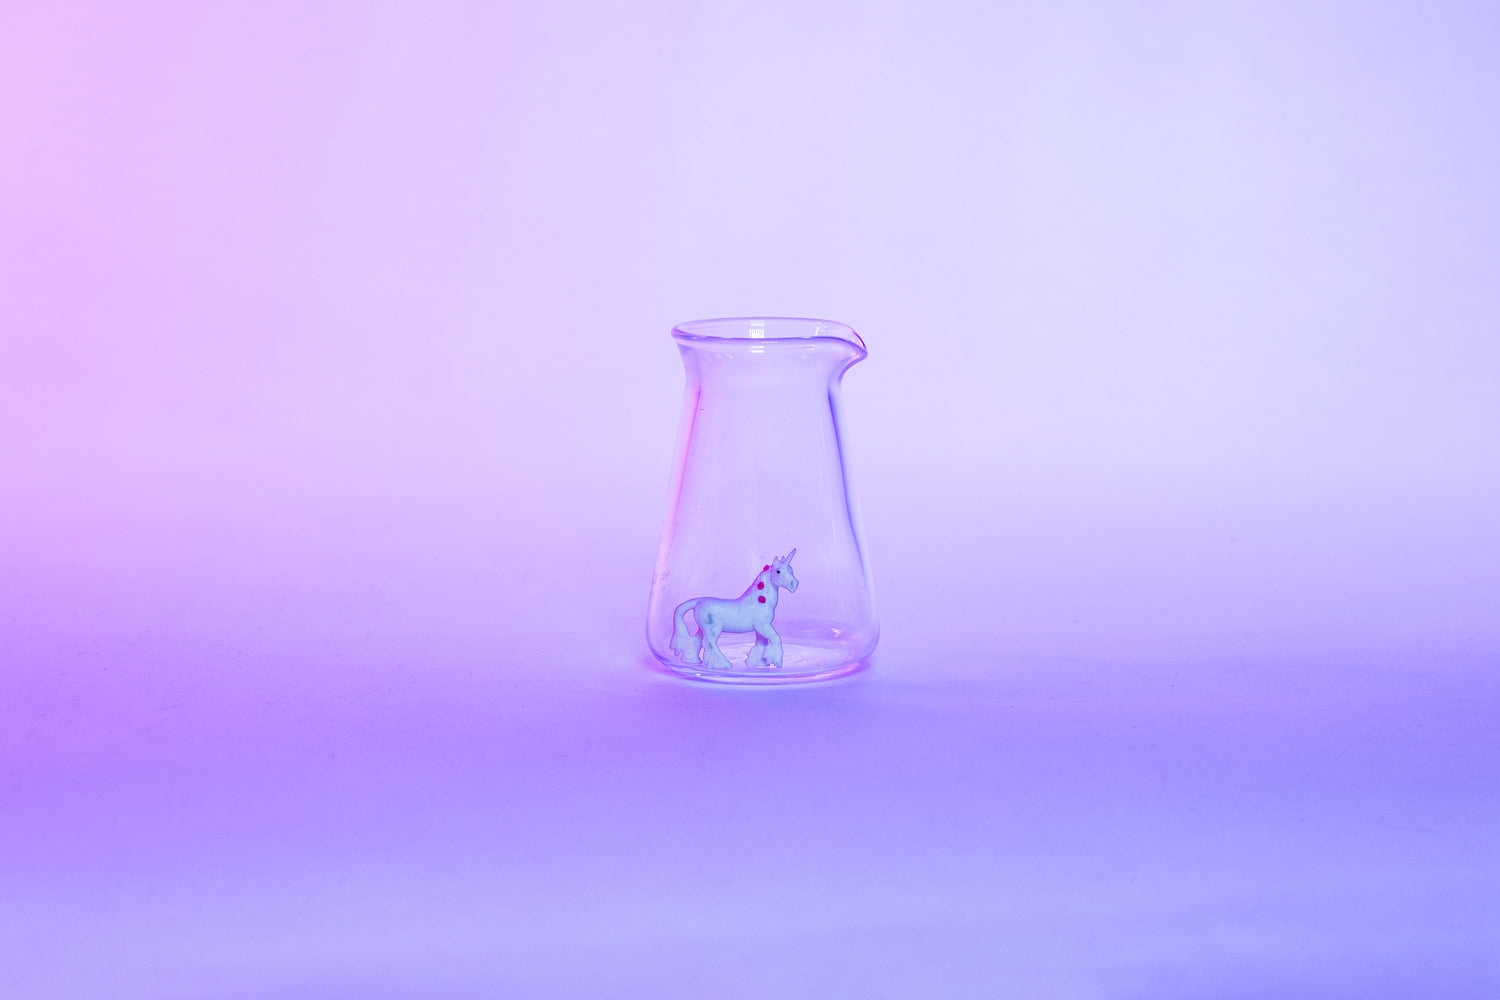 Conical glass flask-shaped coffee pitcher with small white unicorn toy inside and set against a light pink and purple background.